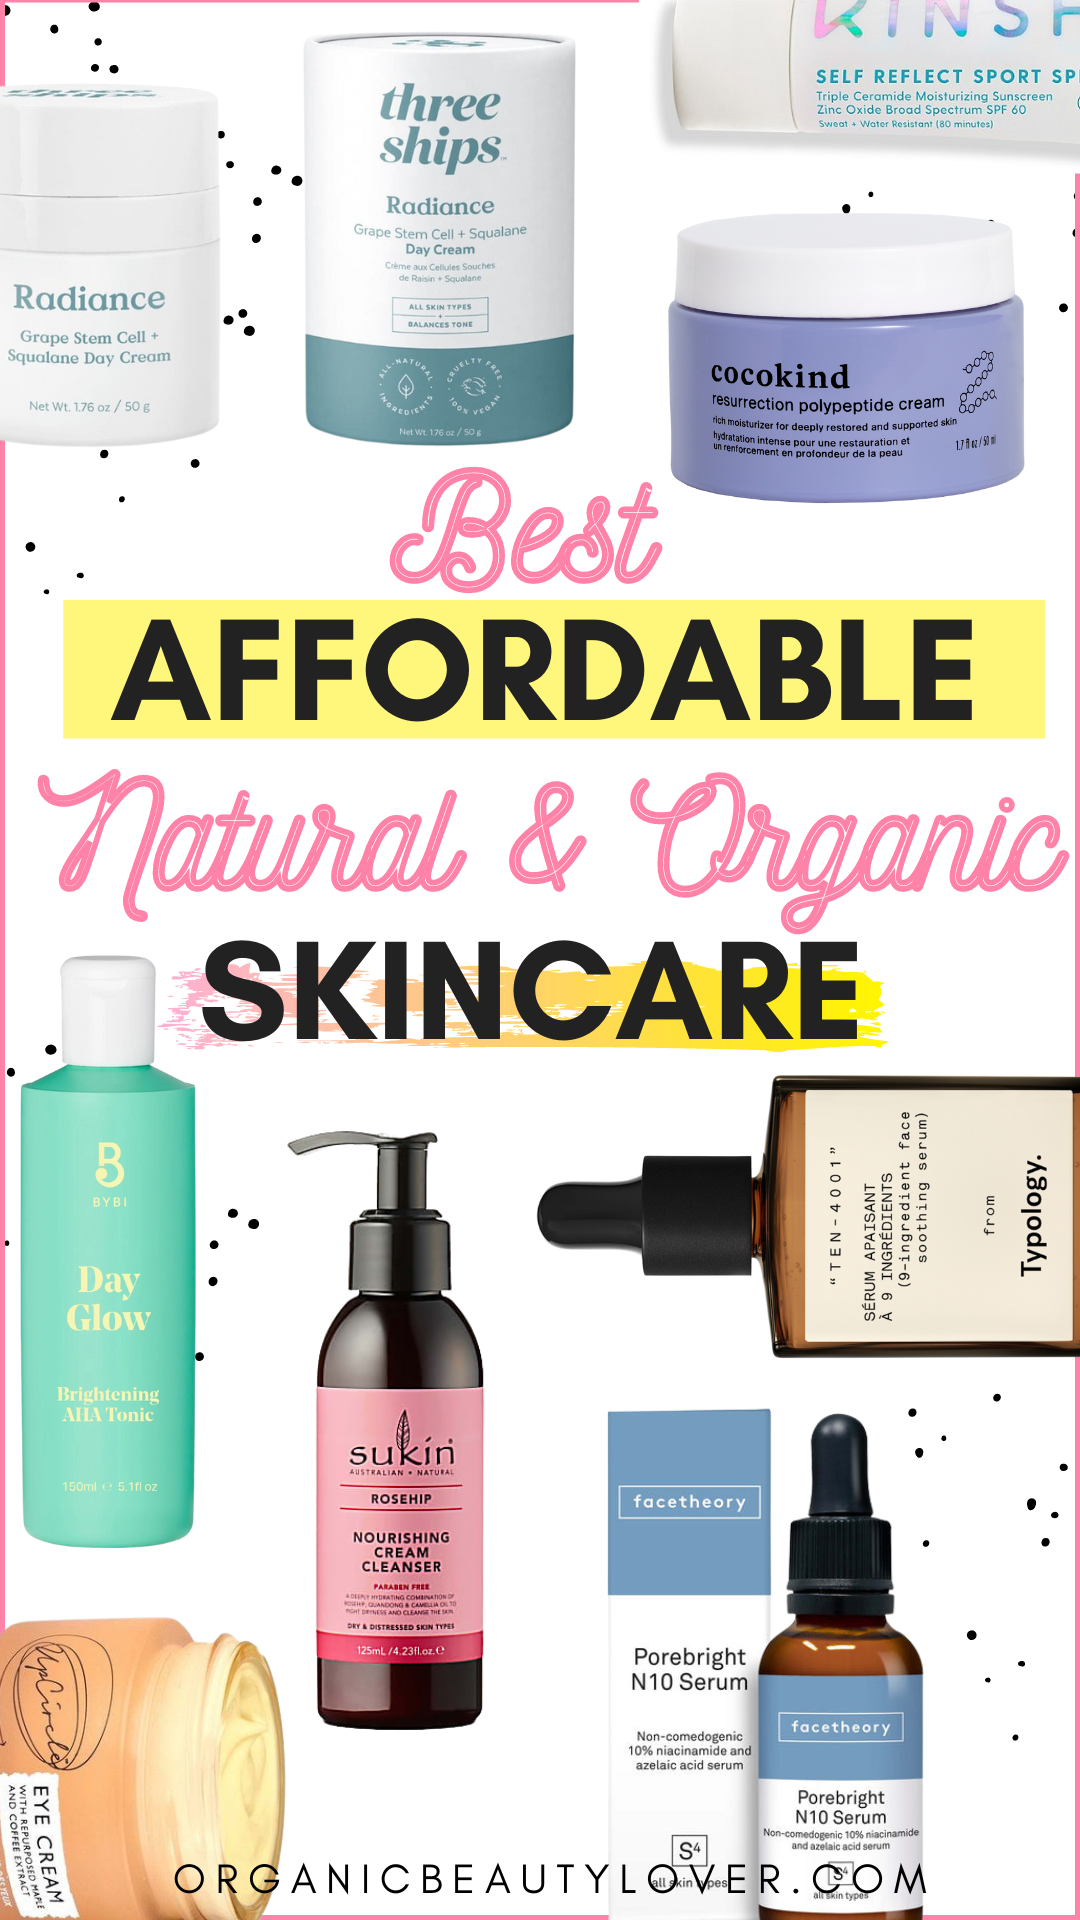 12 Clean & Sustainable Beauty Brands to Add to Your Routine